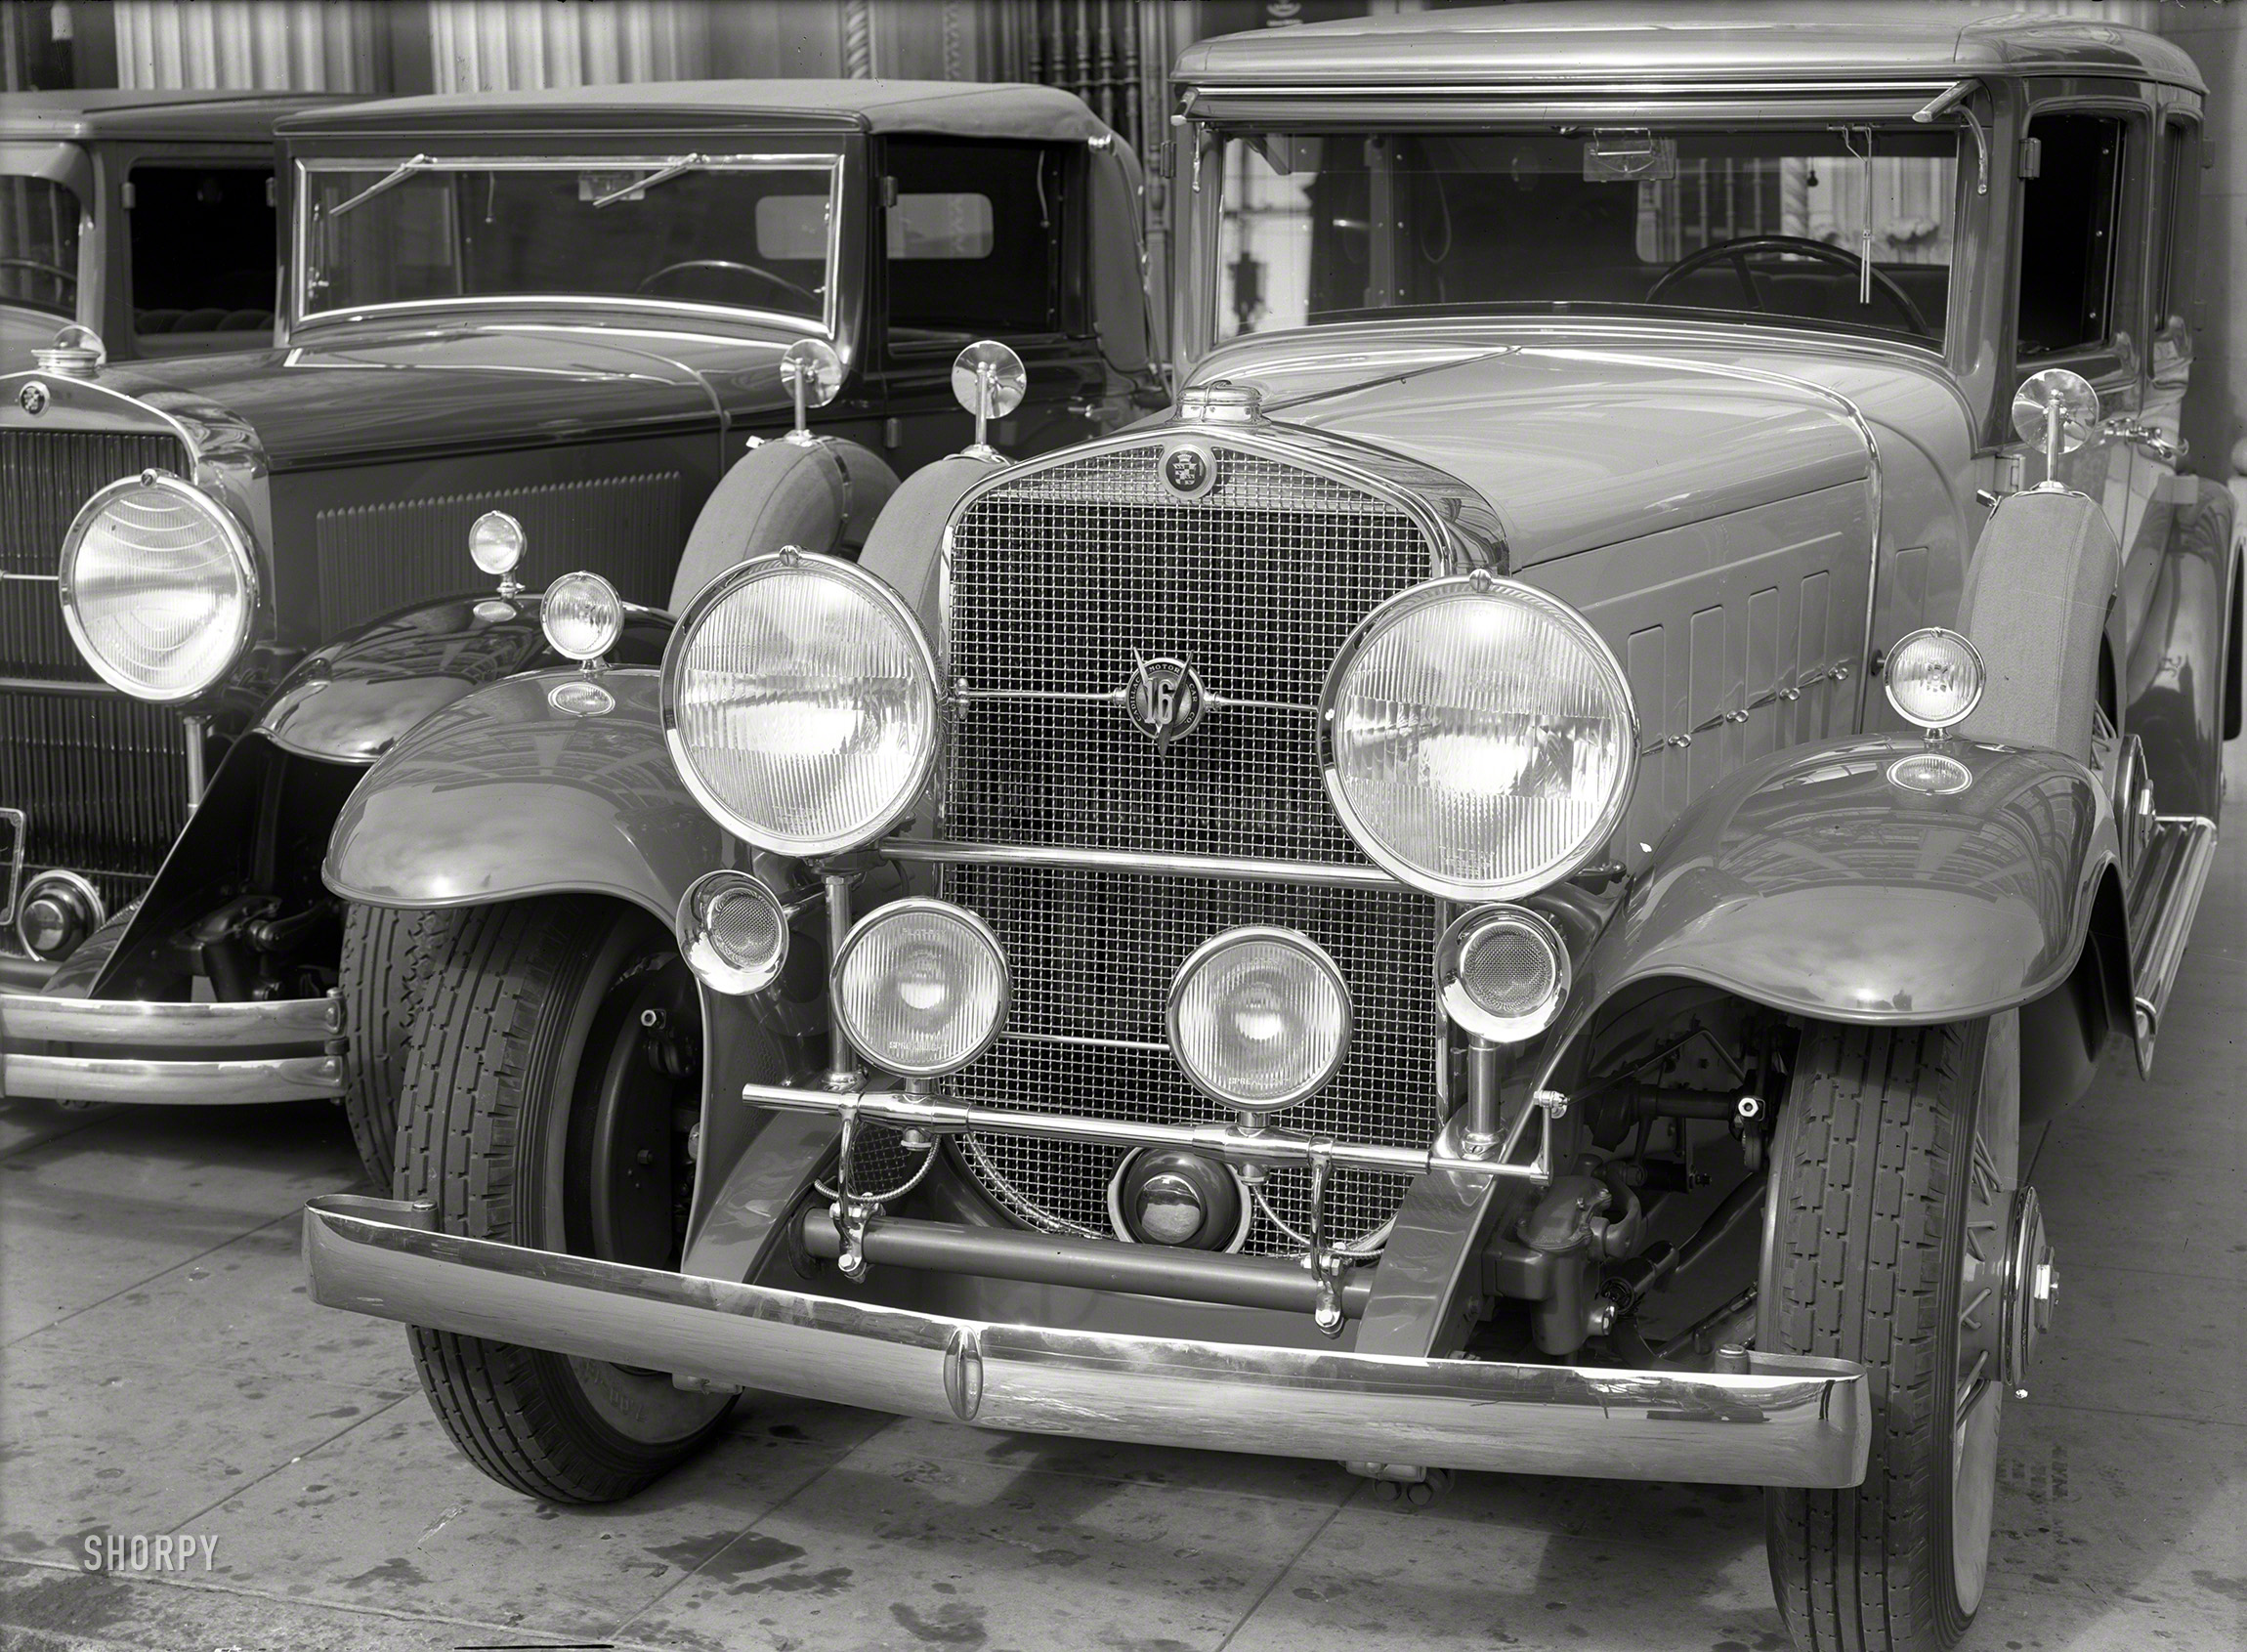 San Francisco circa 1931. "V-16 at Don Lee Cadillac agency." A sixteen-cylinder leviathan beached on the shoals of the Great Depression. One of these cars might cost as much as 10 Chevrolets. 5x7 glass negative by Chris Helin. View full size.